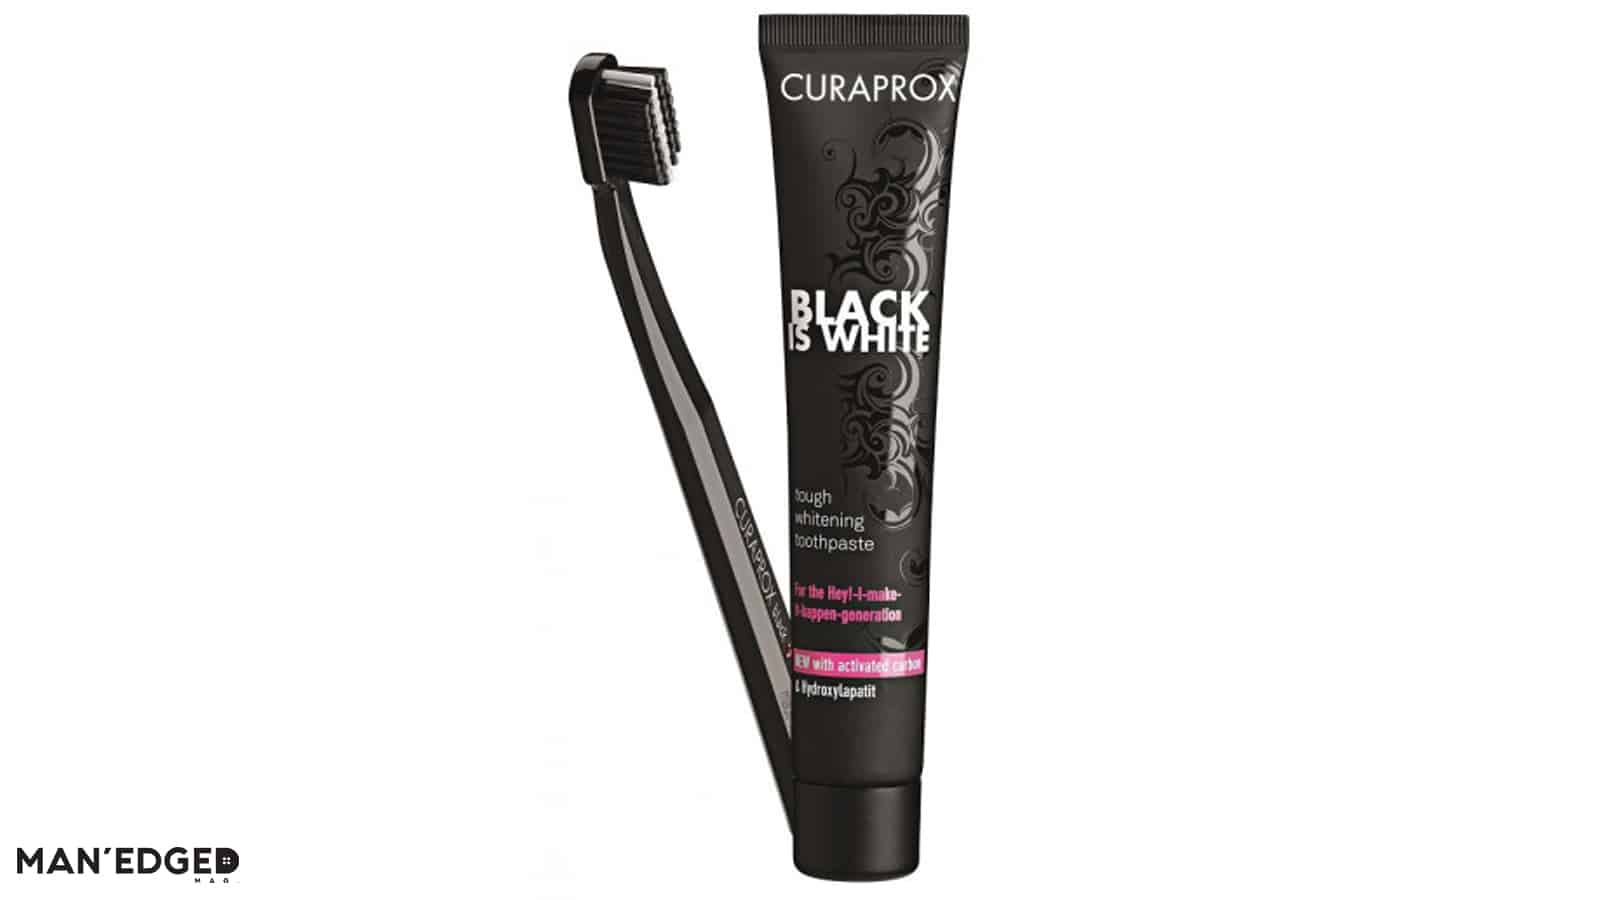 Curapox black is white toothbrush featured in gift ideas for the boyfriend or husband